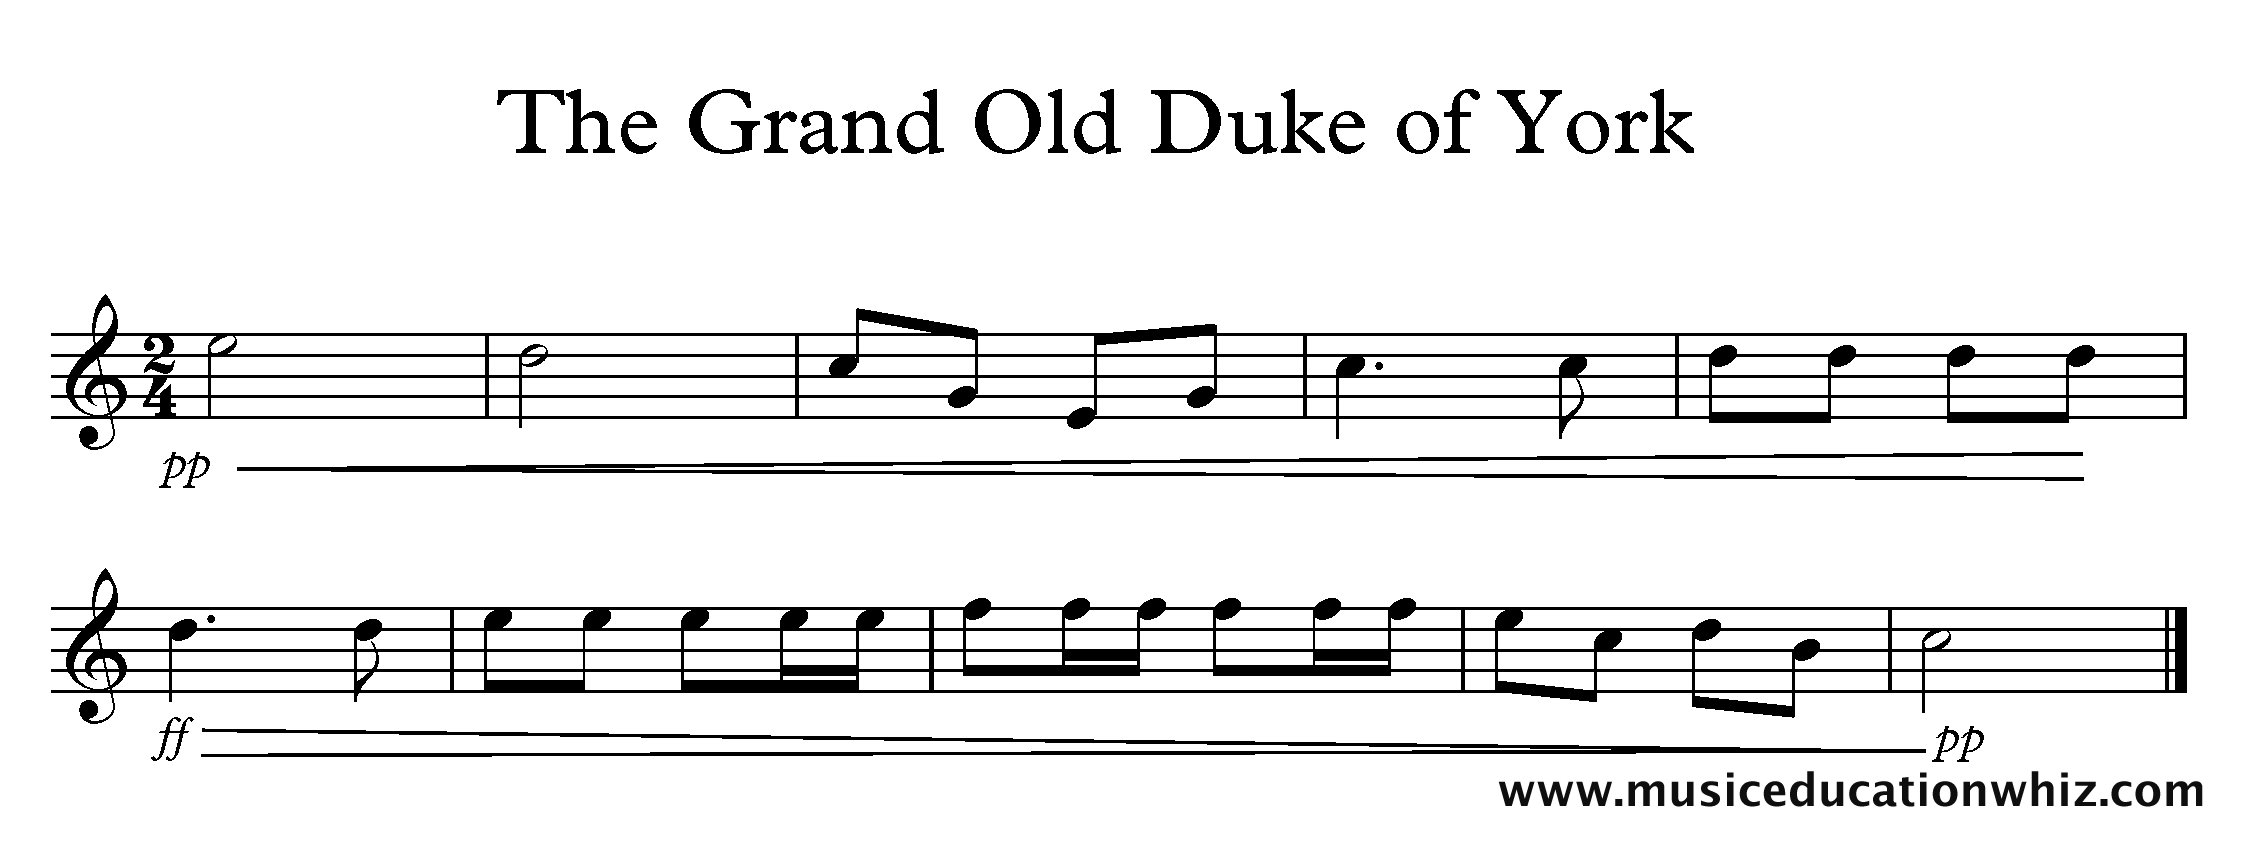 The Grand Old Duke of York melody starting pp followed by a crescendo hairpin to the middle of the piece up to ff, followed by a diminuendo hairpin to pp at the end.